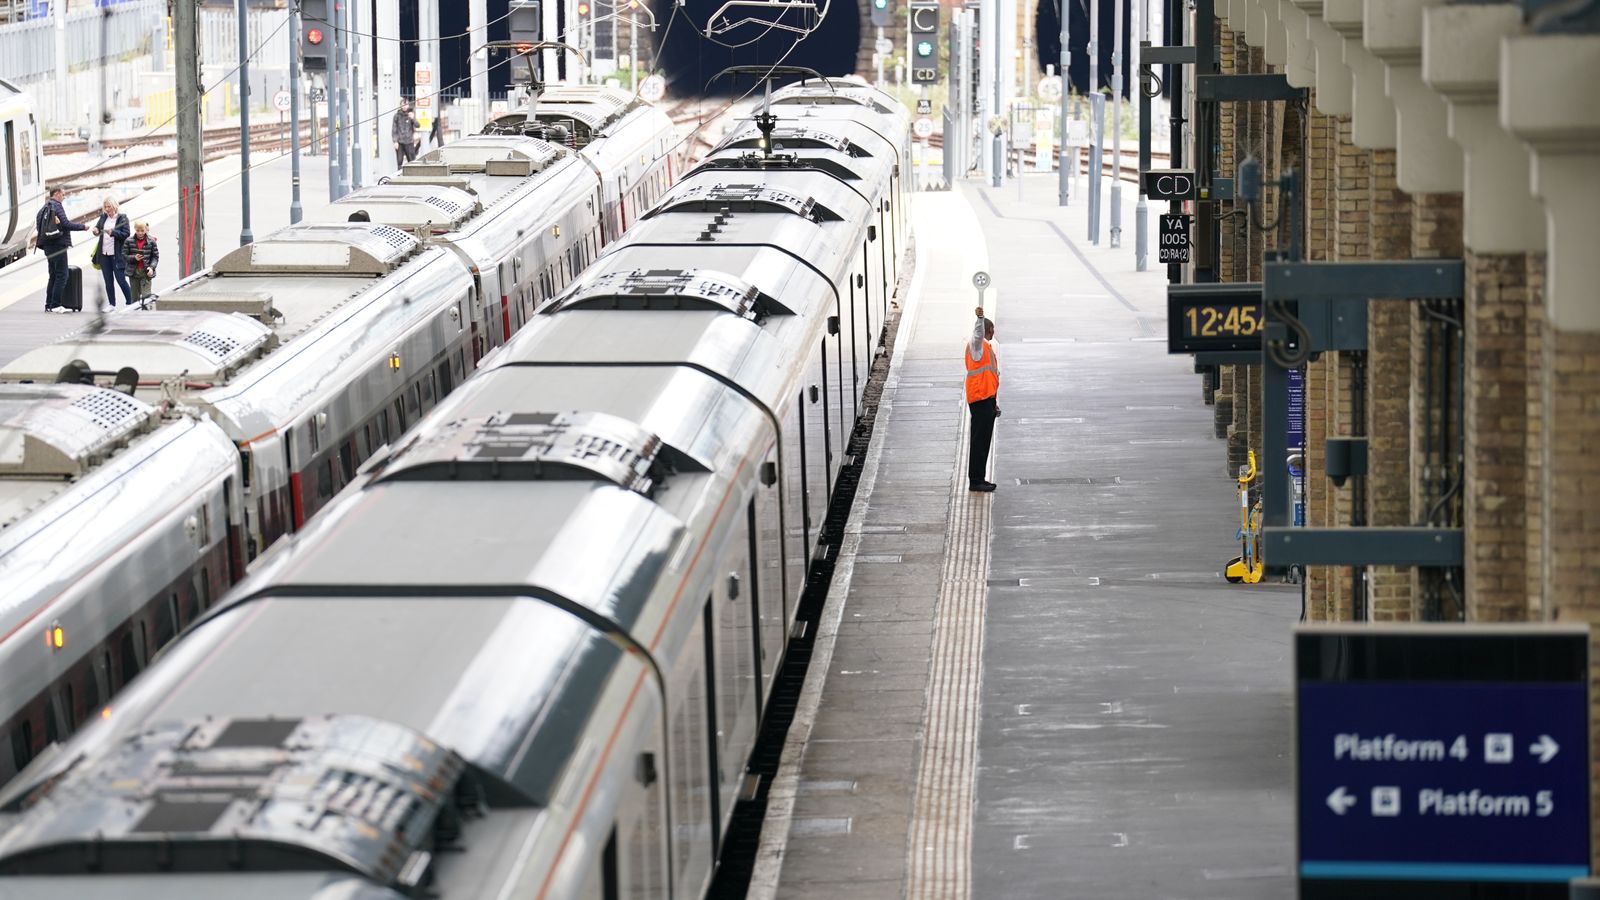 Rail strike: Only around one in five trains to run as passengers urged to only travel if 'absolutely necessary'